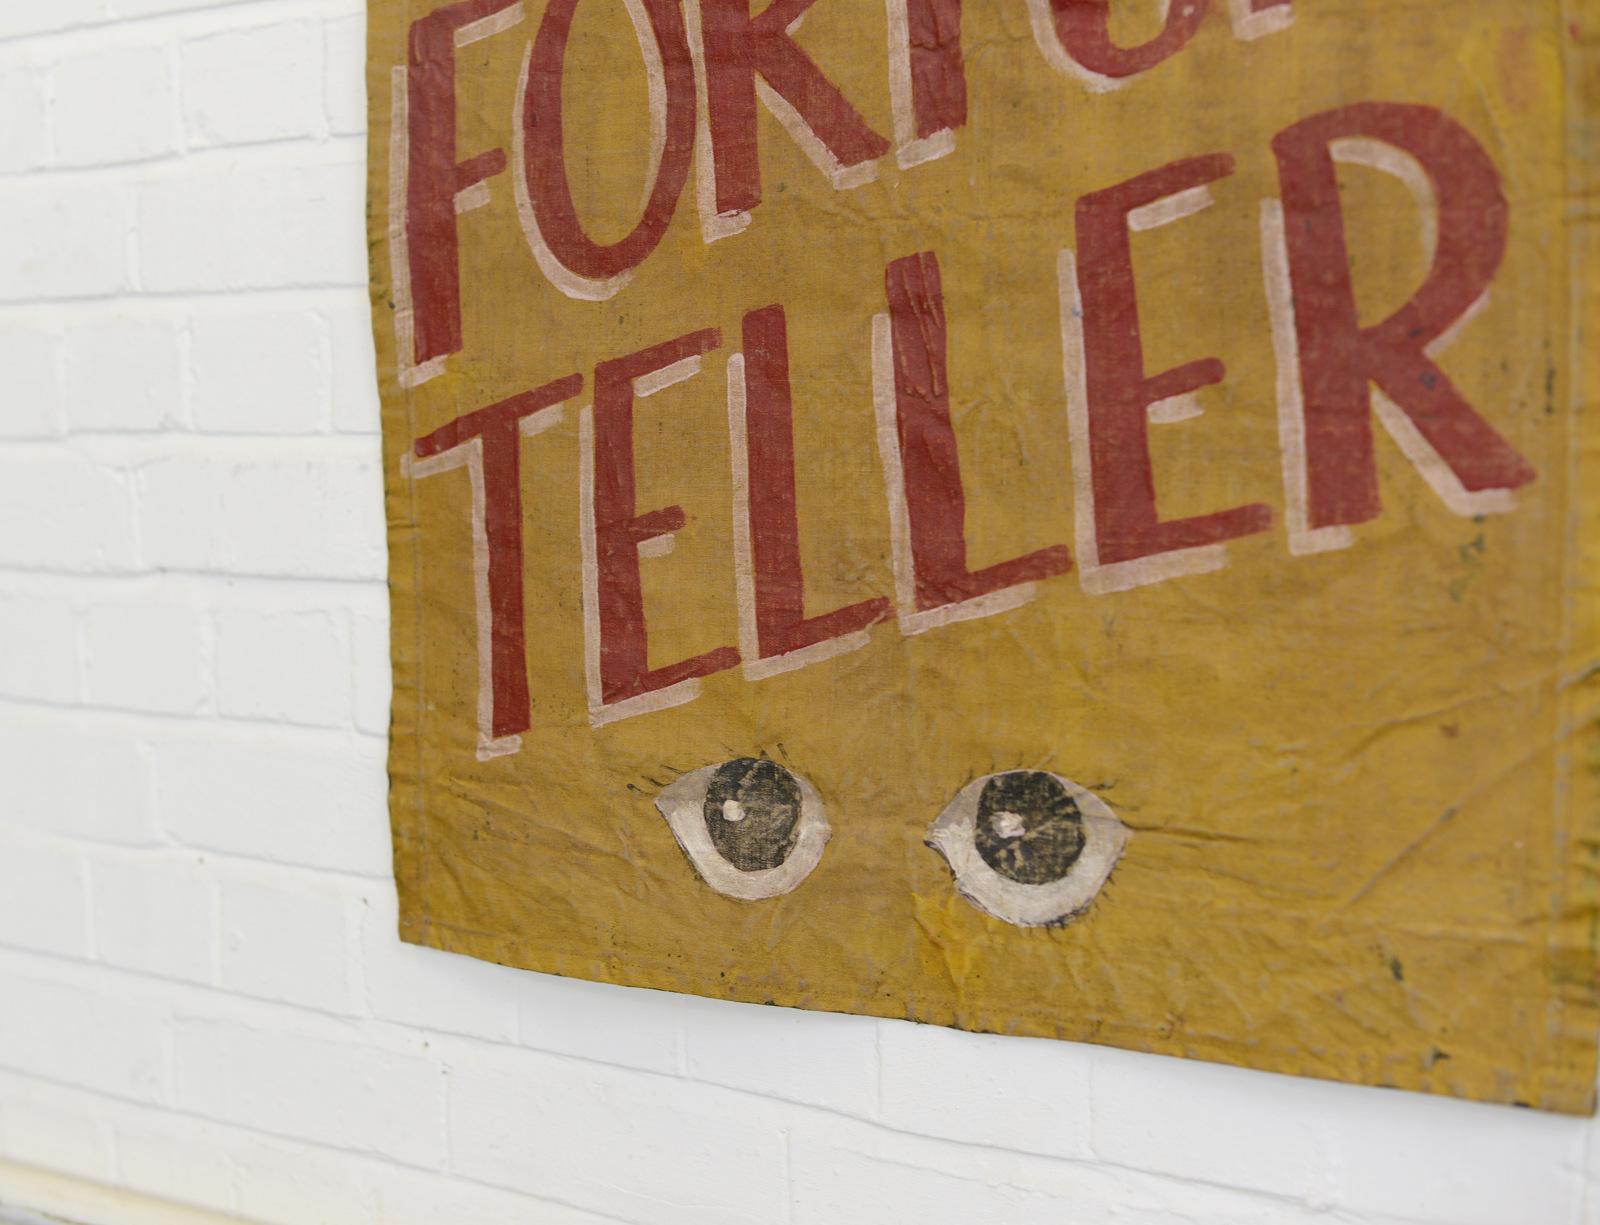 Canvas fortune teller sideshow banner, circa 1950s

- Hand painted on wax canvas
- Mustard yellow background 
- Red lettering
- English, 1950s
- Measures: 66cm wide x 92cm tall.

Condition report:

Some light creasing and age marks.
 